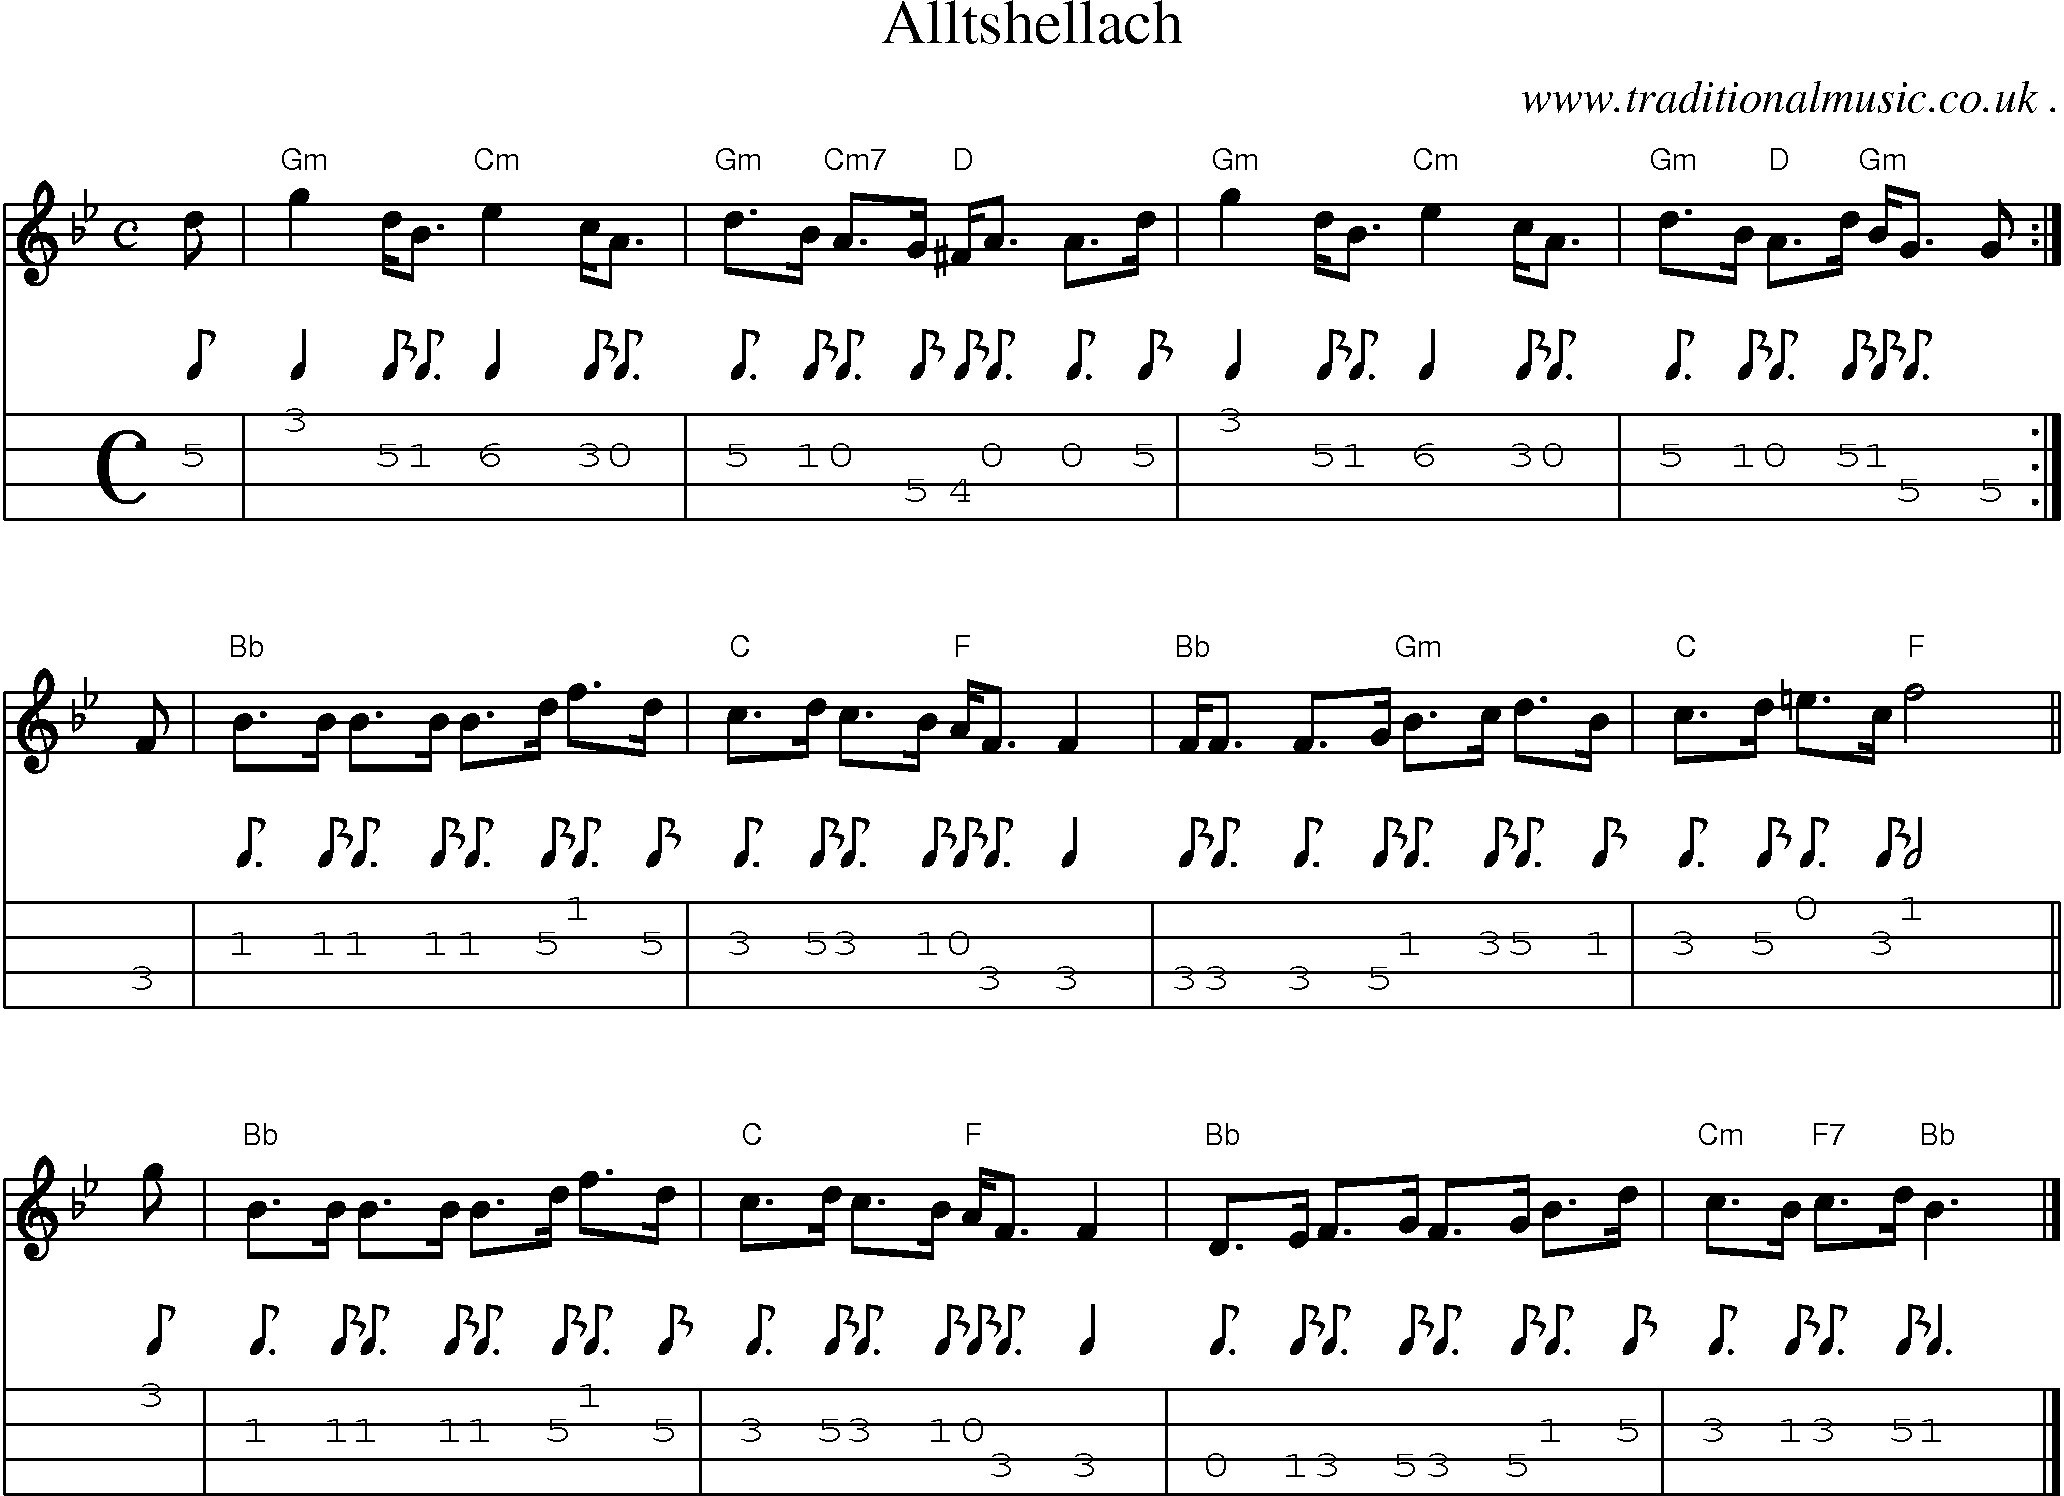 Sheet-music  score, Chords and Mandolin Tabs for Alltshellach